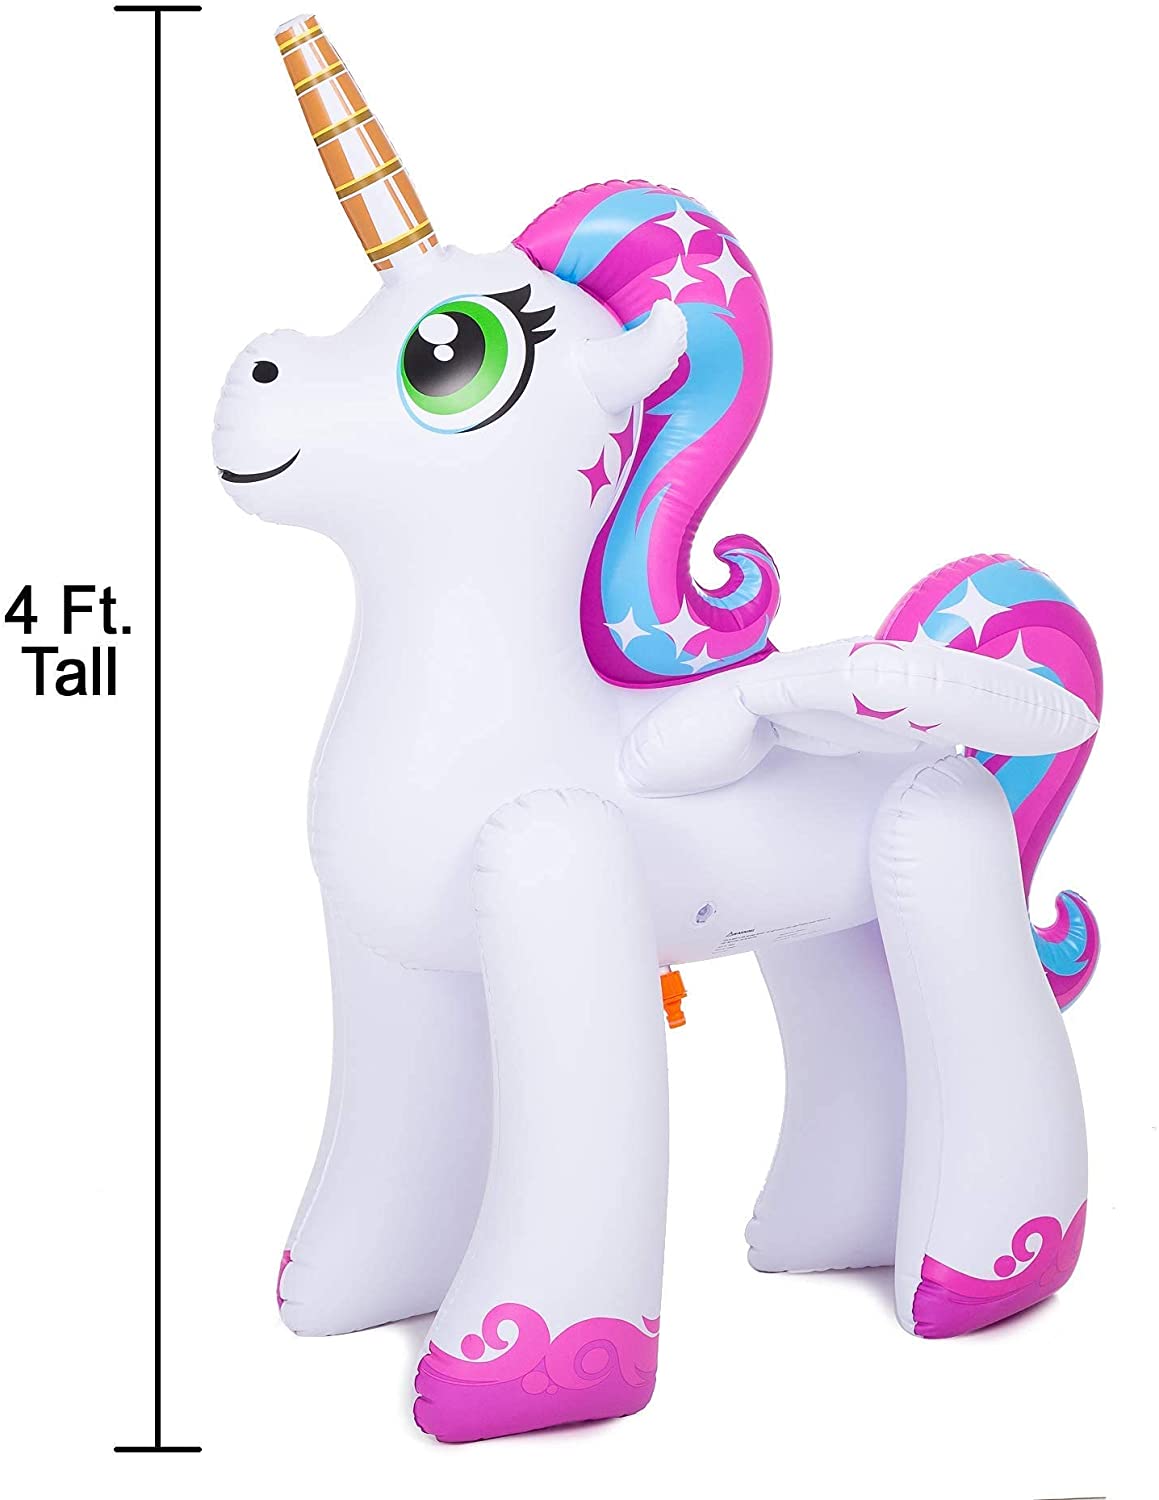 JOYIN 48” Inflatable Unicorn Yard Sprinkler, Inflatable Water Toy for Summer Outdoor Fun, Lawn Sprinkler Toy for Kids - (For 8 piece(s))